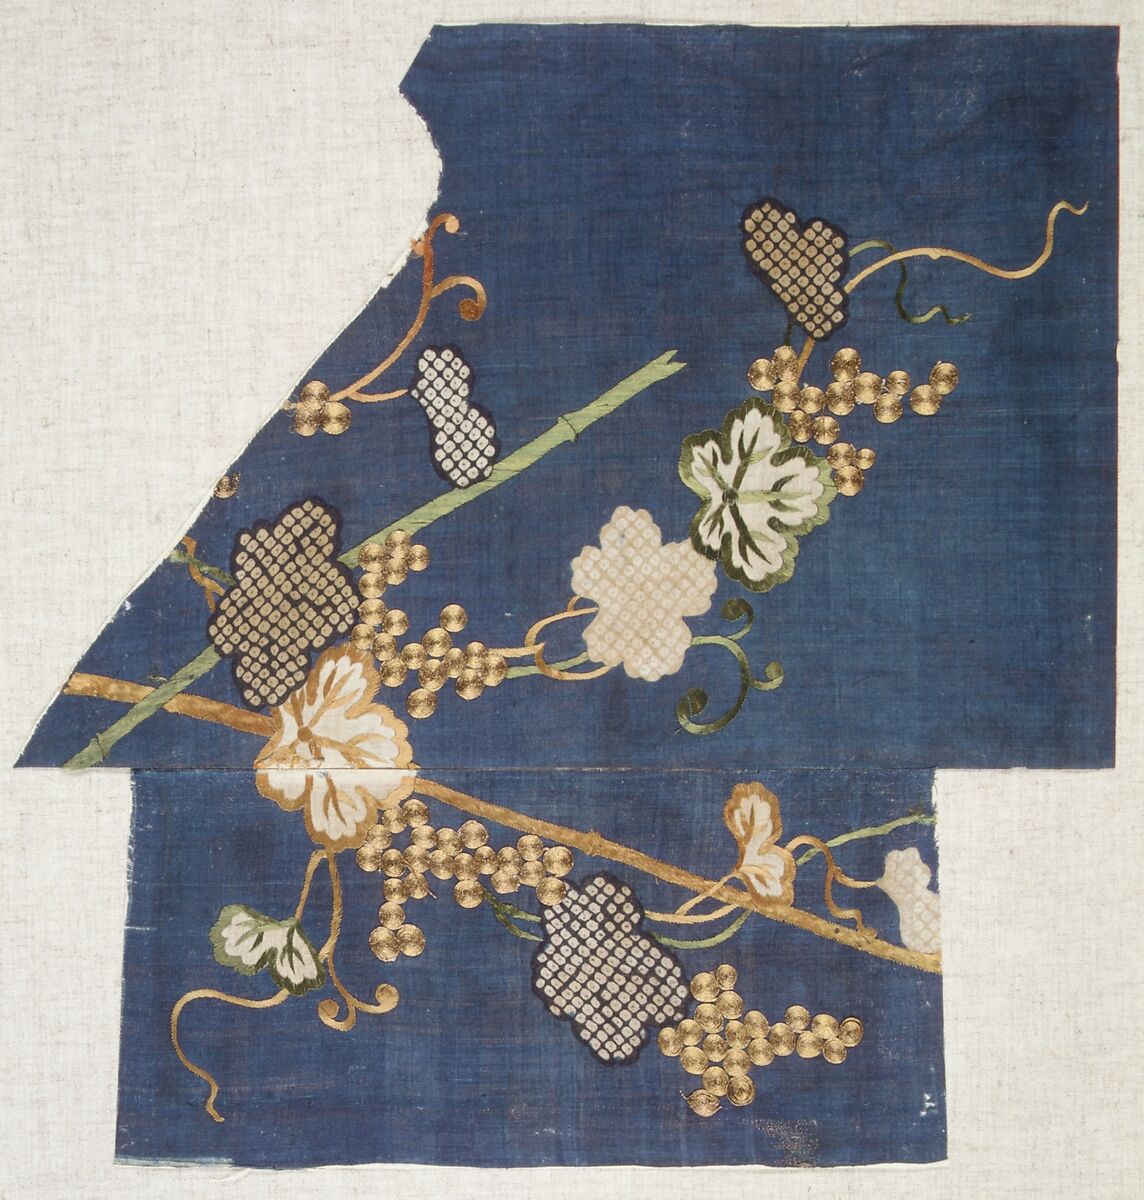 Fragments of a Summer Kosode (Katabira) with Grapevine, Shibori-dyed plain-weave bast fiber (asa) embroidered with silk and metallic thread, Japan 